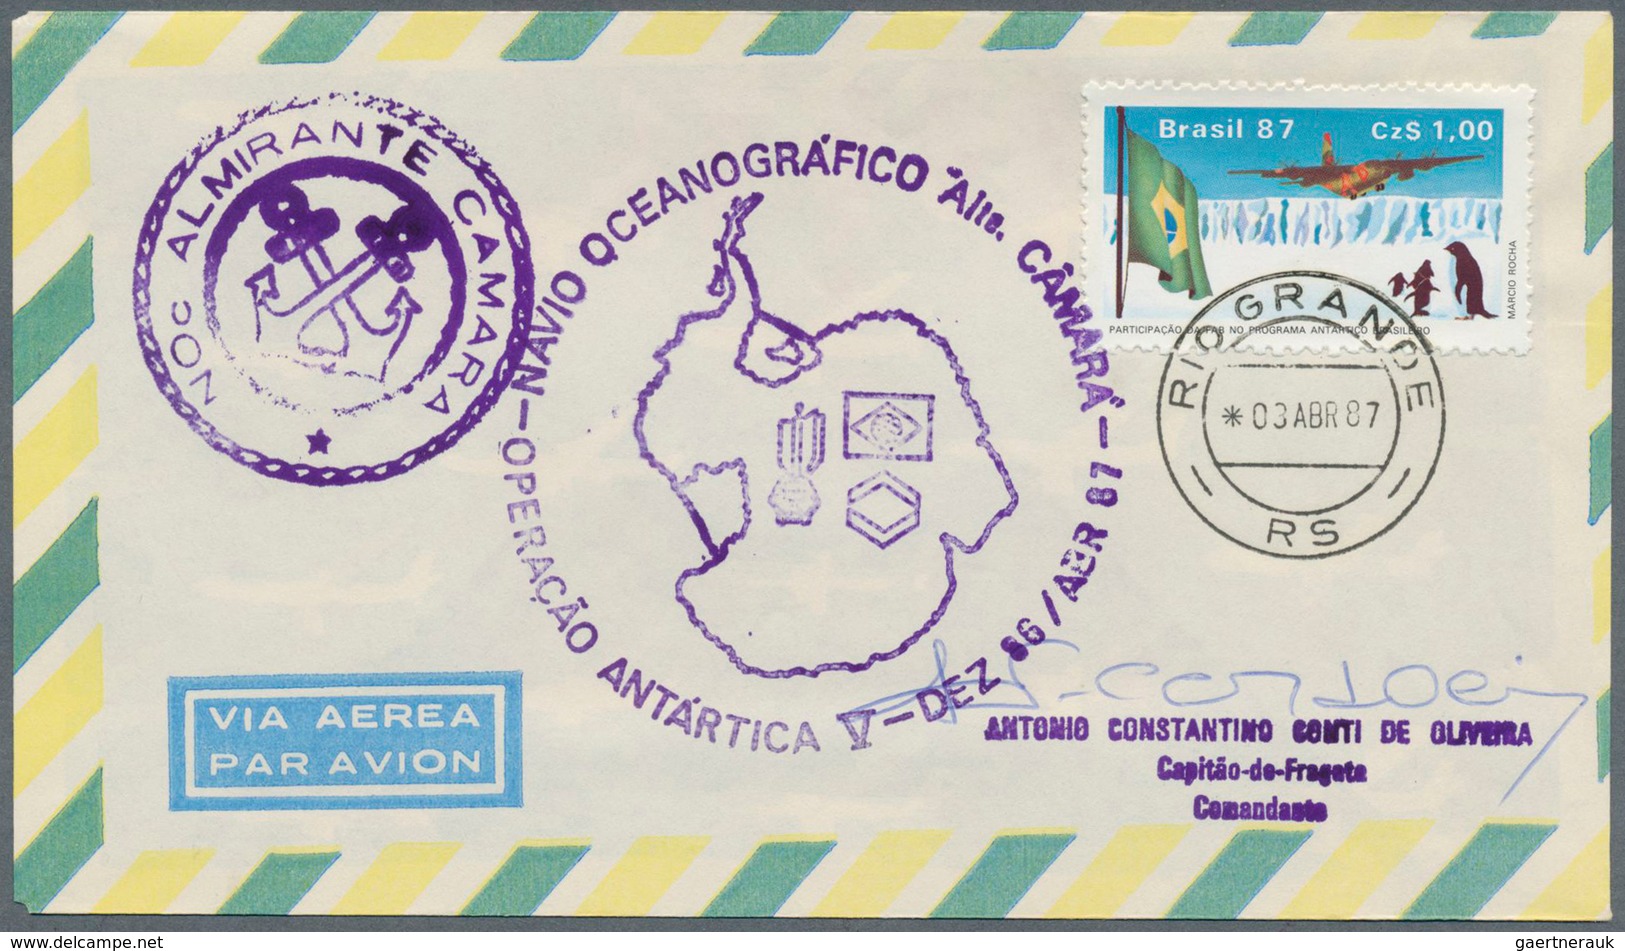 24952 Thematik: Antarktis / antarctic: 1970/2010 (ca.), most sophisticated balance of apprx. 1500+ (fairly